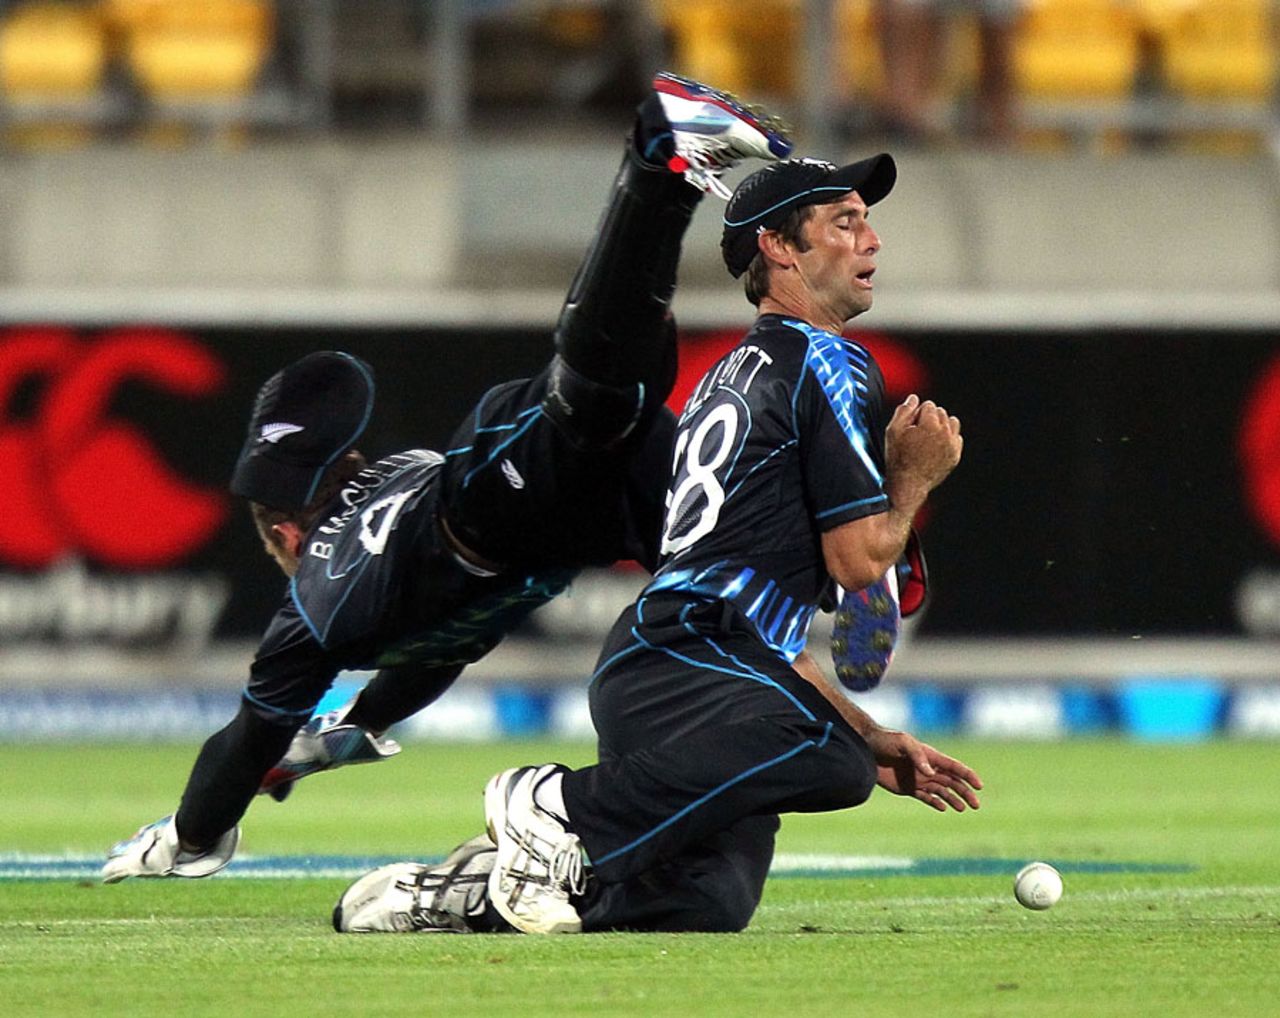 Brendon McCullum and Grant Elliott almost collided as a catch was missed, New Zealand v England, 3rd T20, Wellington, February 15, 2013